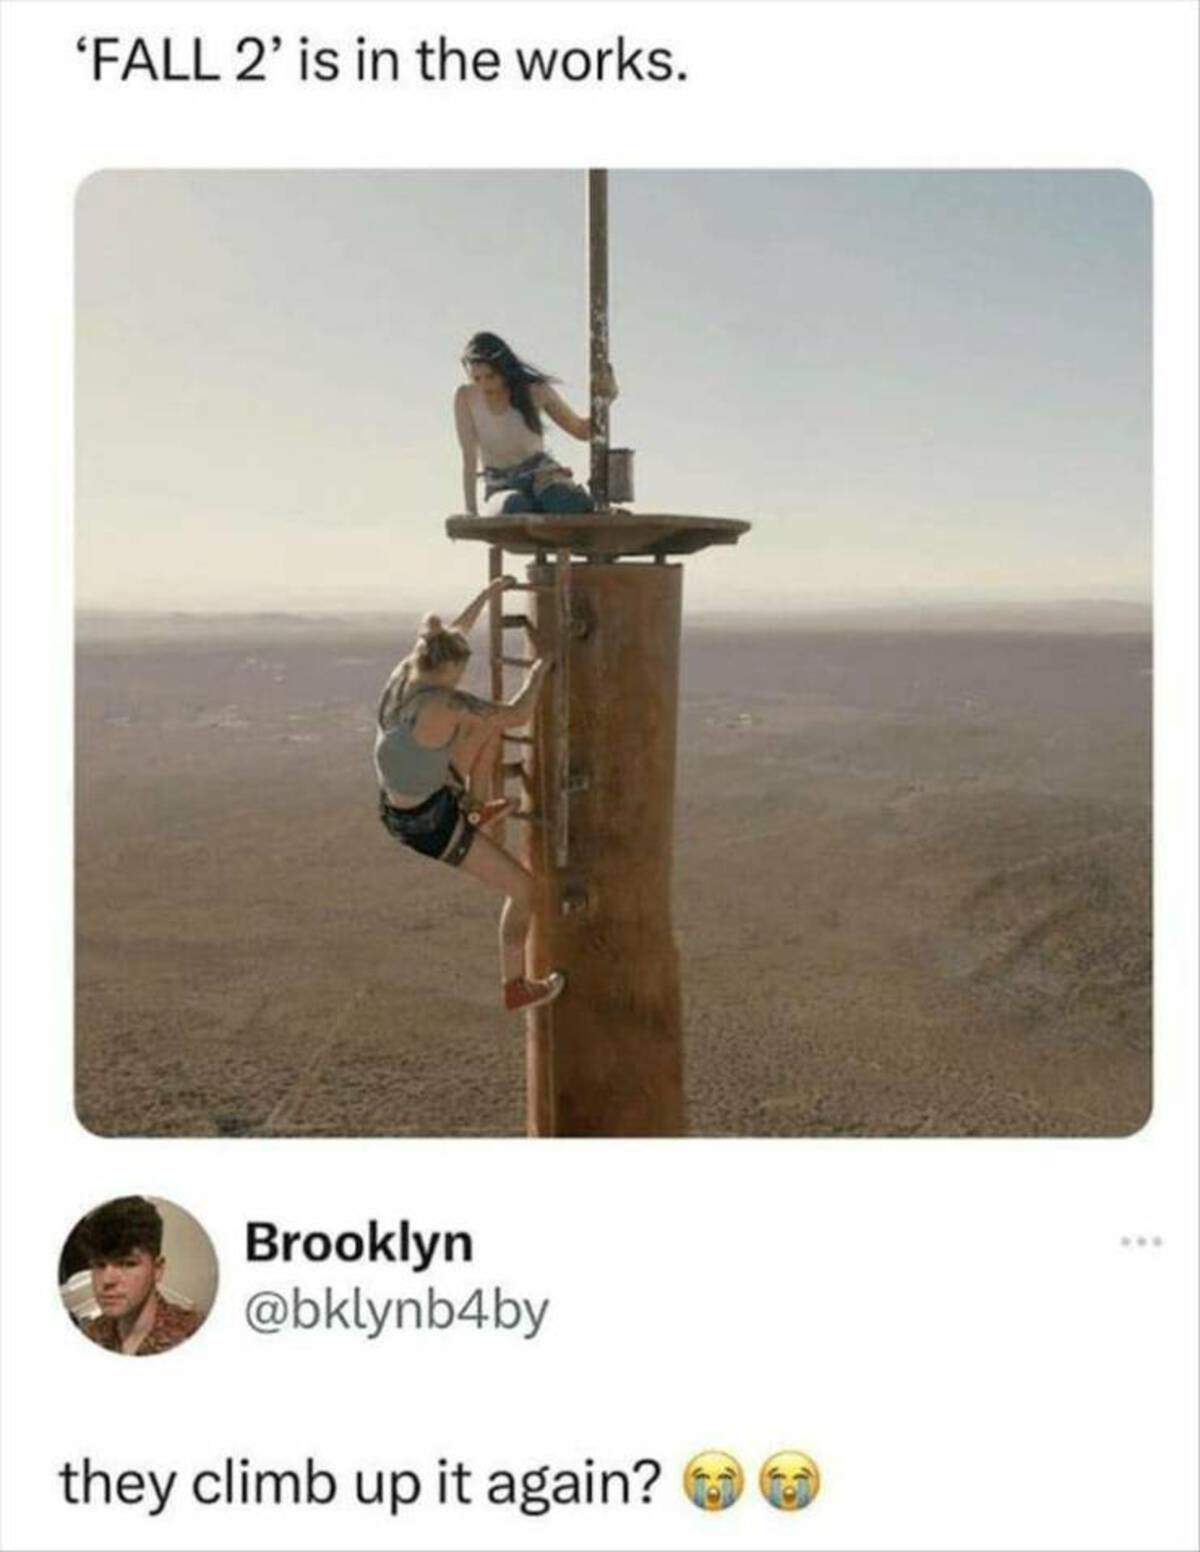 fall movie behind the scenes - 'Fall 2' is in the works. Brooklyn they climb up it again?